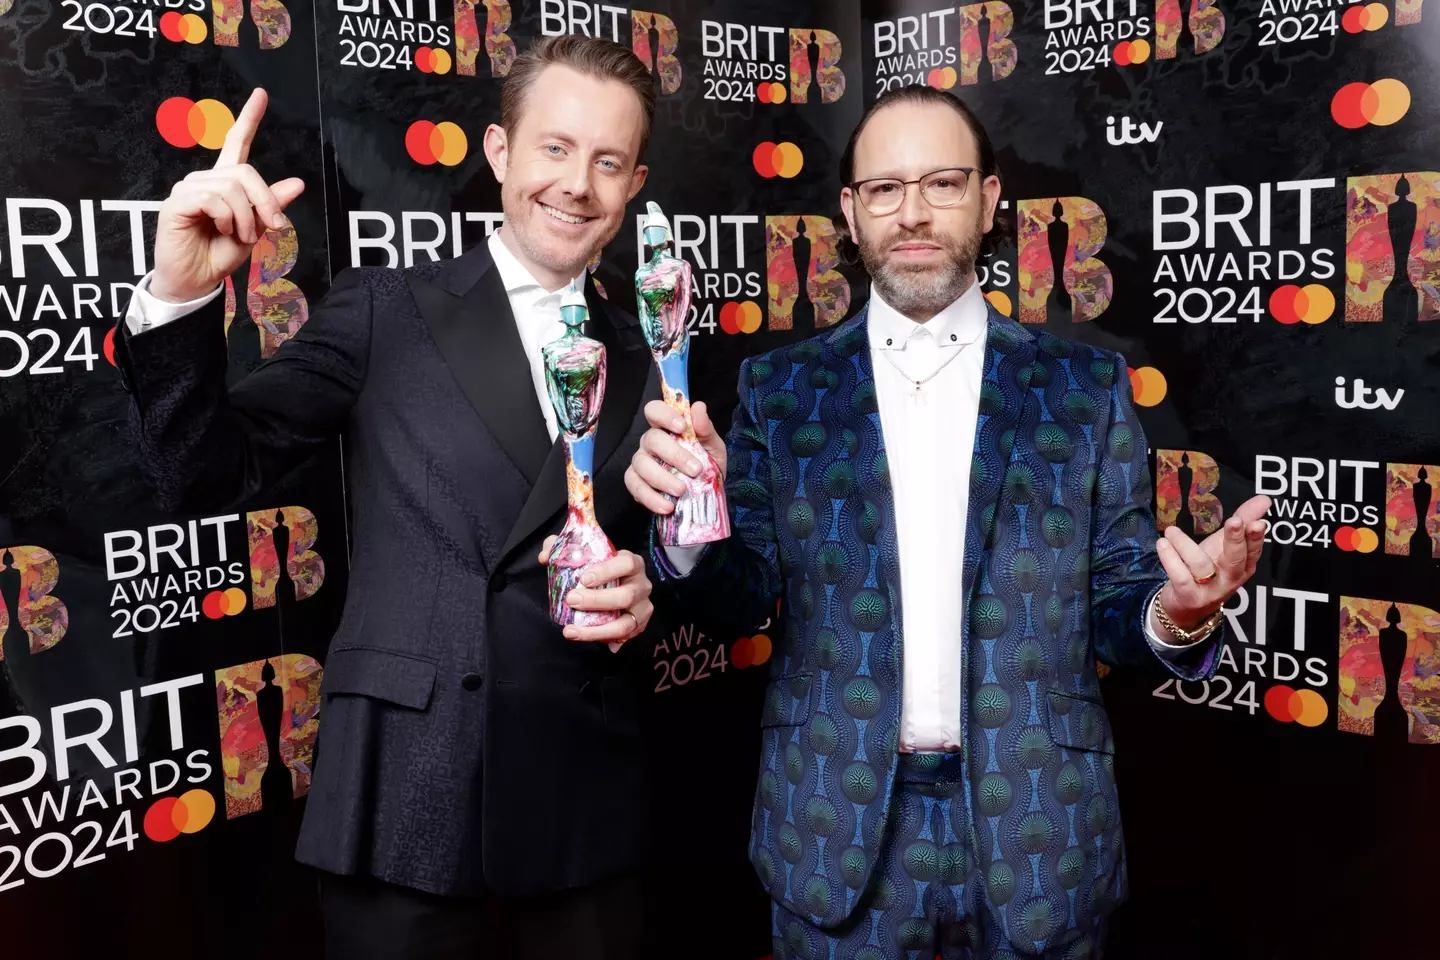 Chase & Status won Producer of the Year.